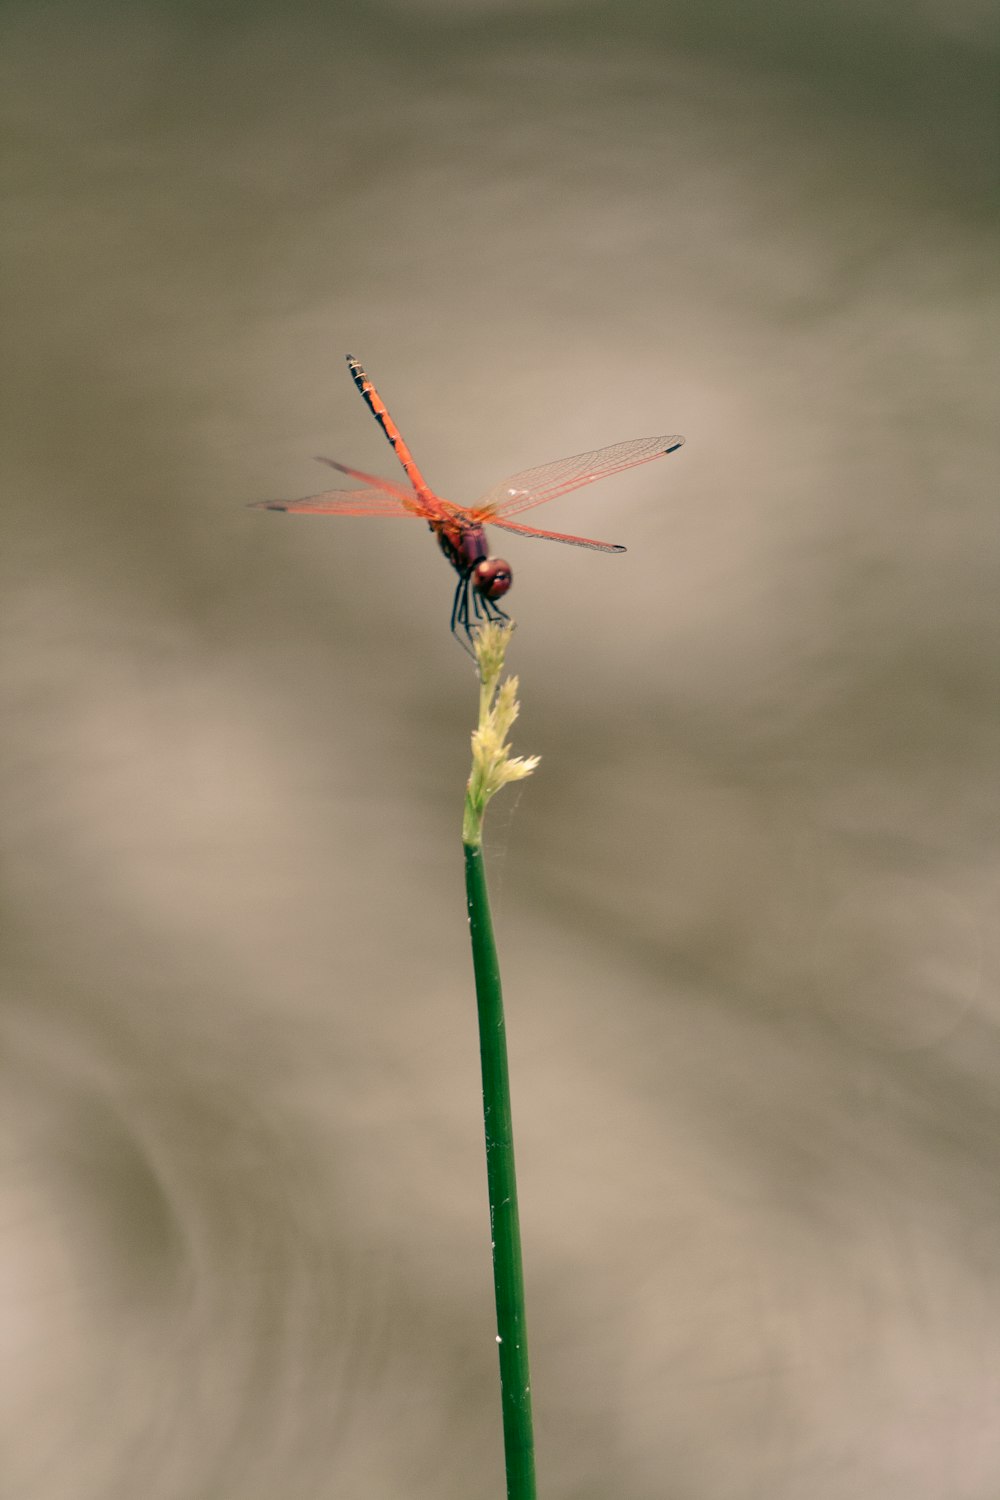 red dragonfly perched on green plant in close up photography during daytime